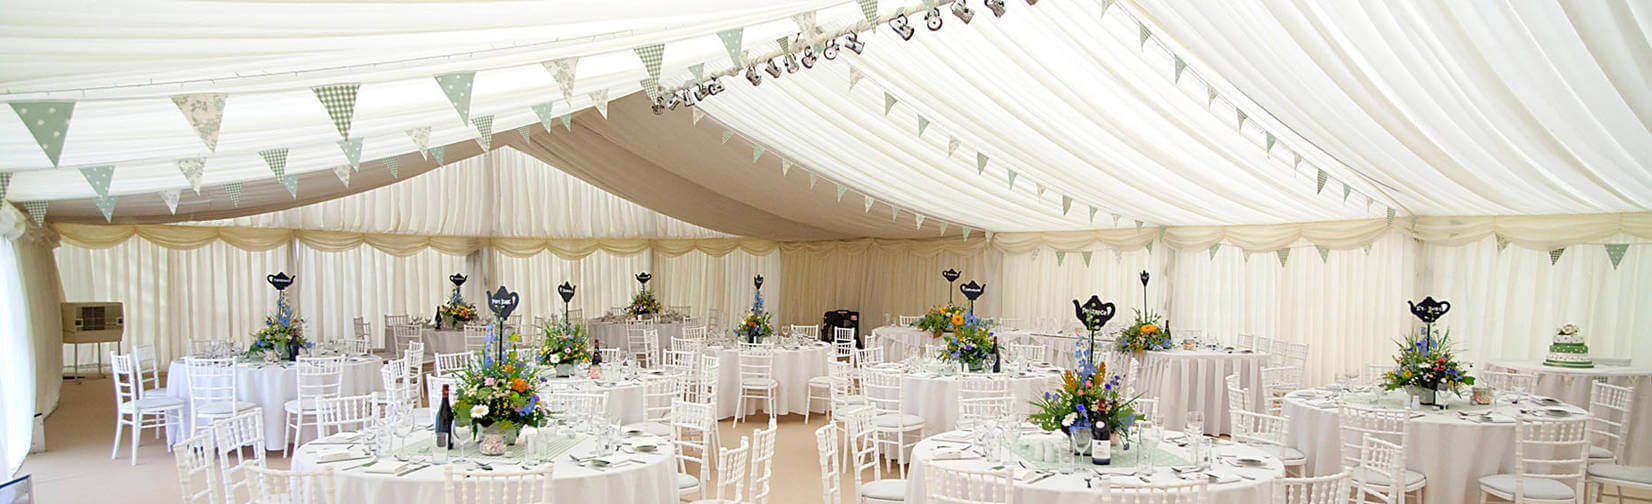 Providing Marquees, Furniture, Flooring, Gourmet Food, DJs and Wedding Entertainment